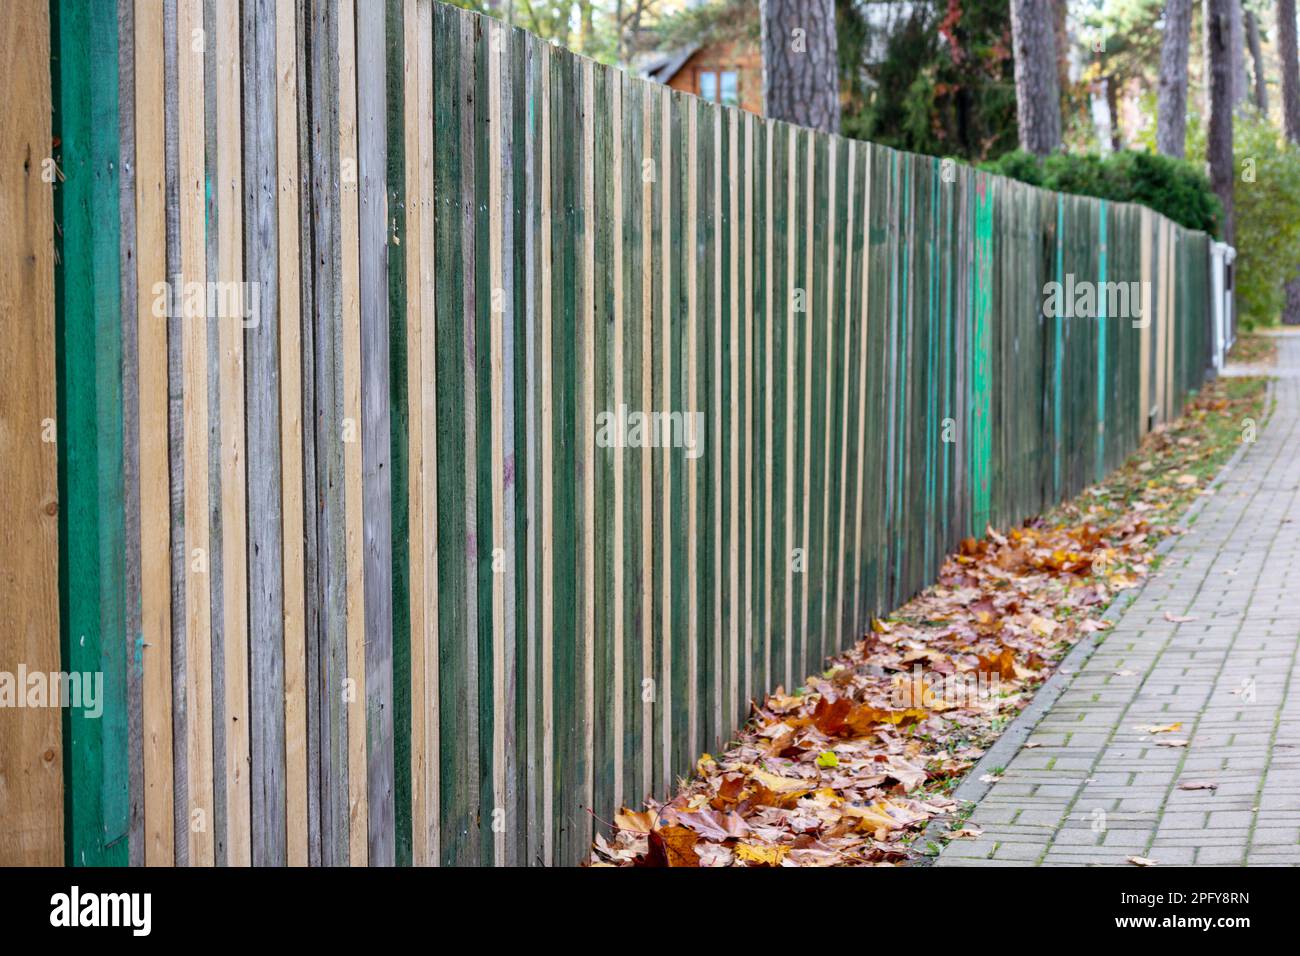 Fence of different colored wooden planks with autumn colored leaves and gray pedestrian pavement going to perspective view Stock Photo